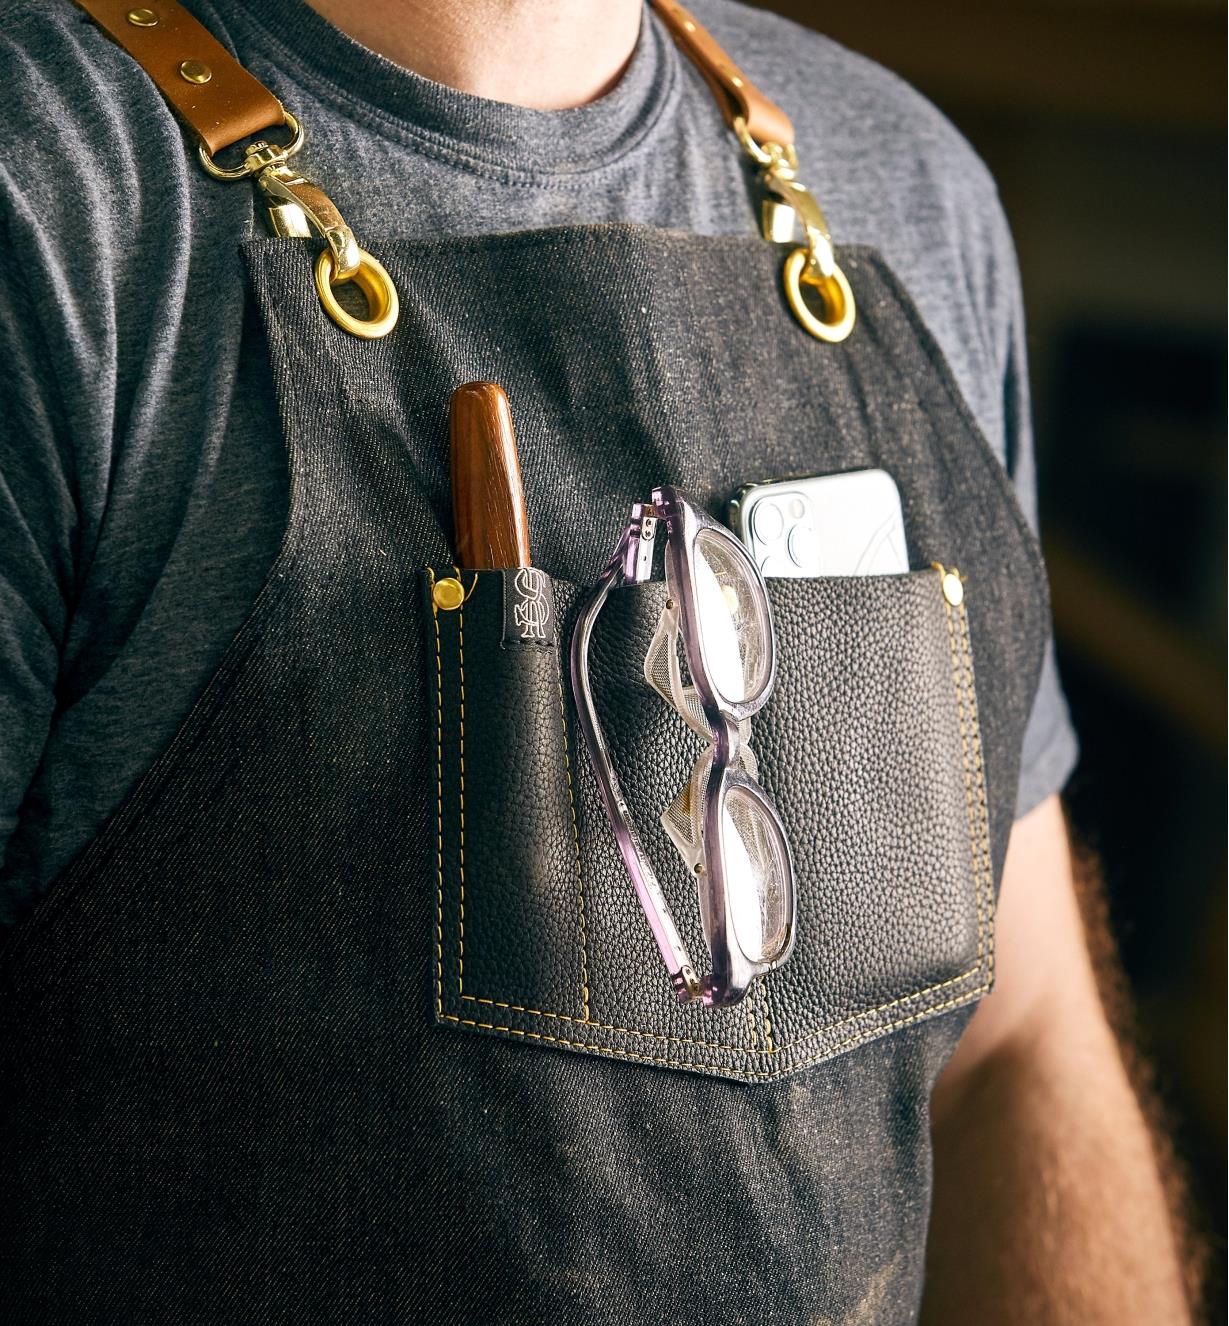 Chest pocket of the All-Purpose Apron holding a carving gouge, safety glasses and a cellphone